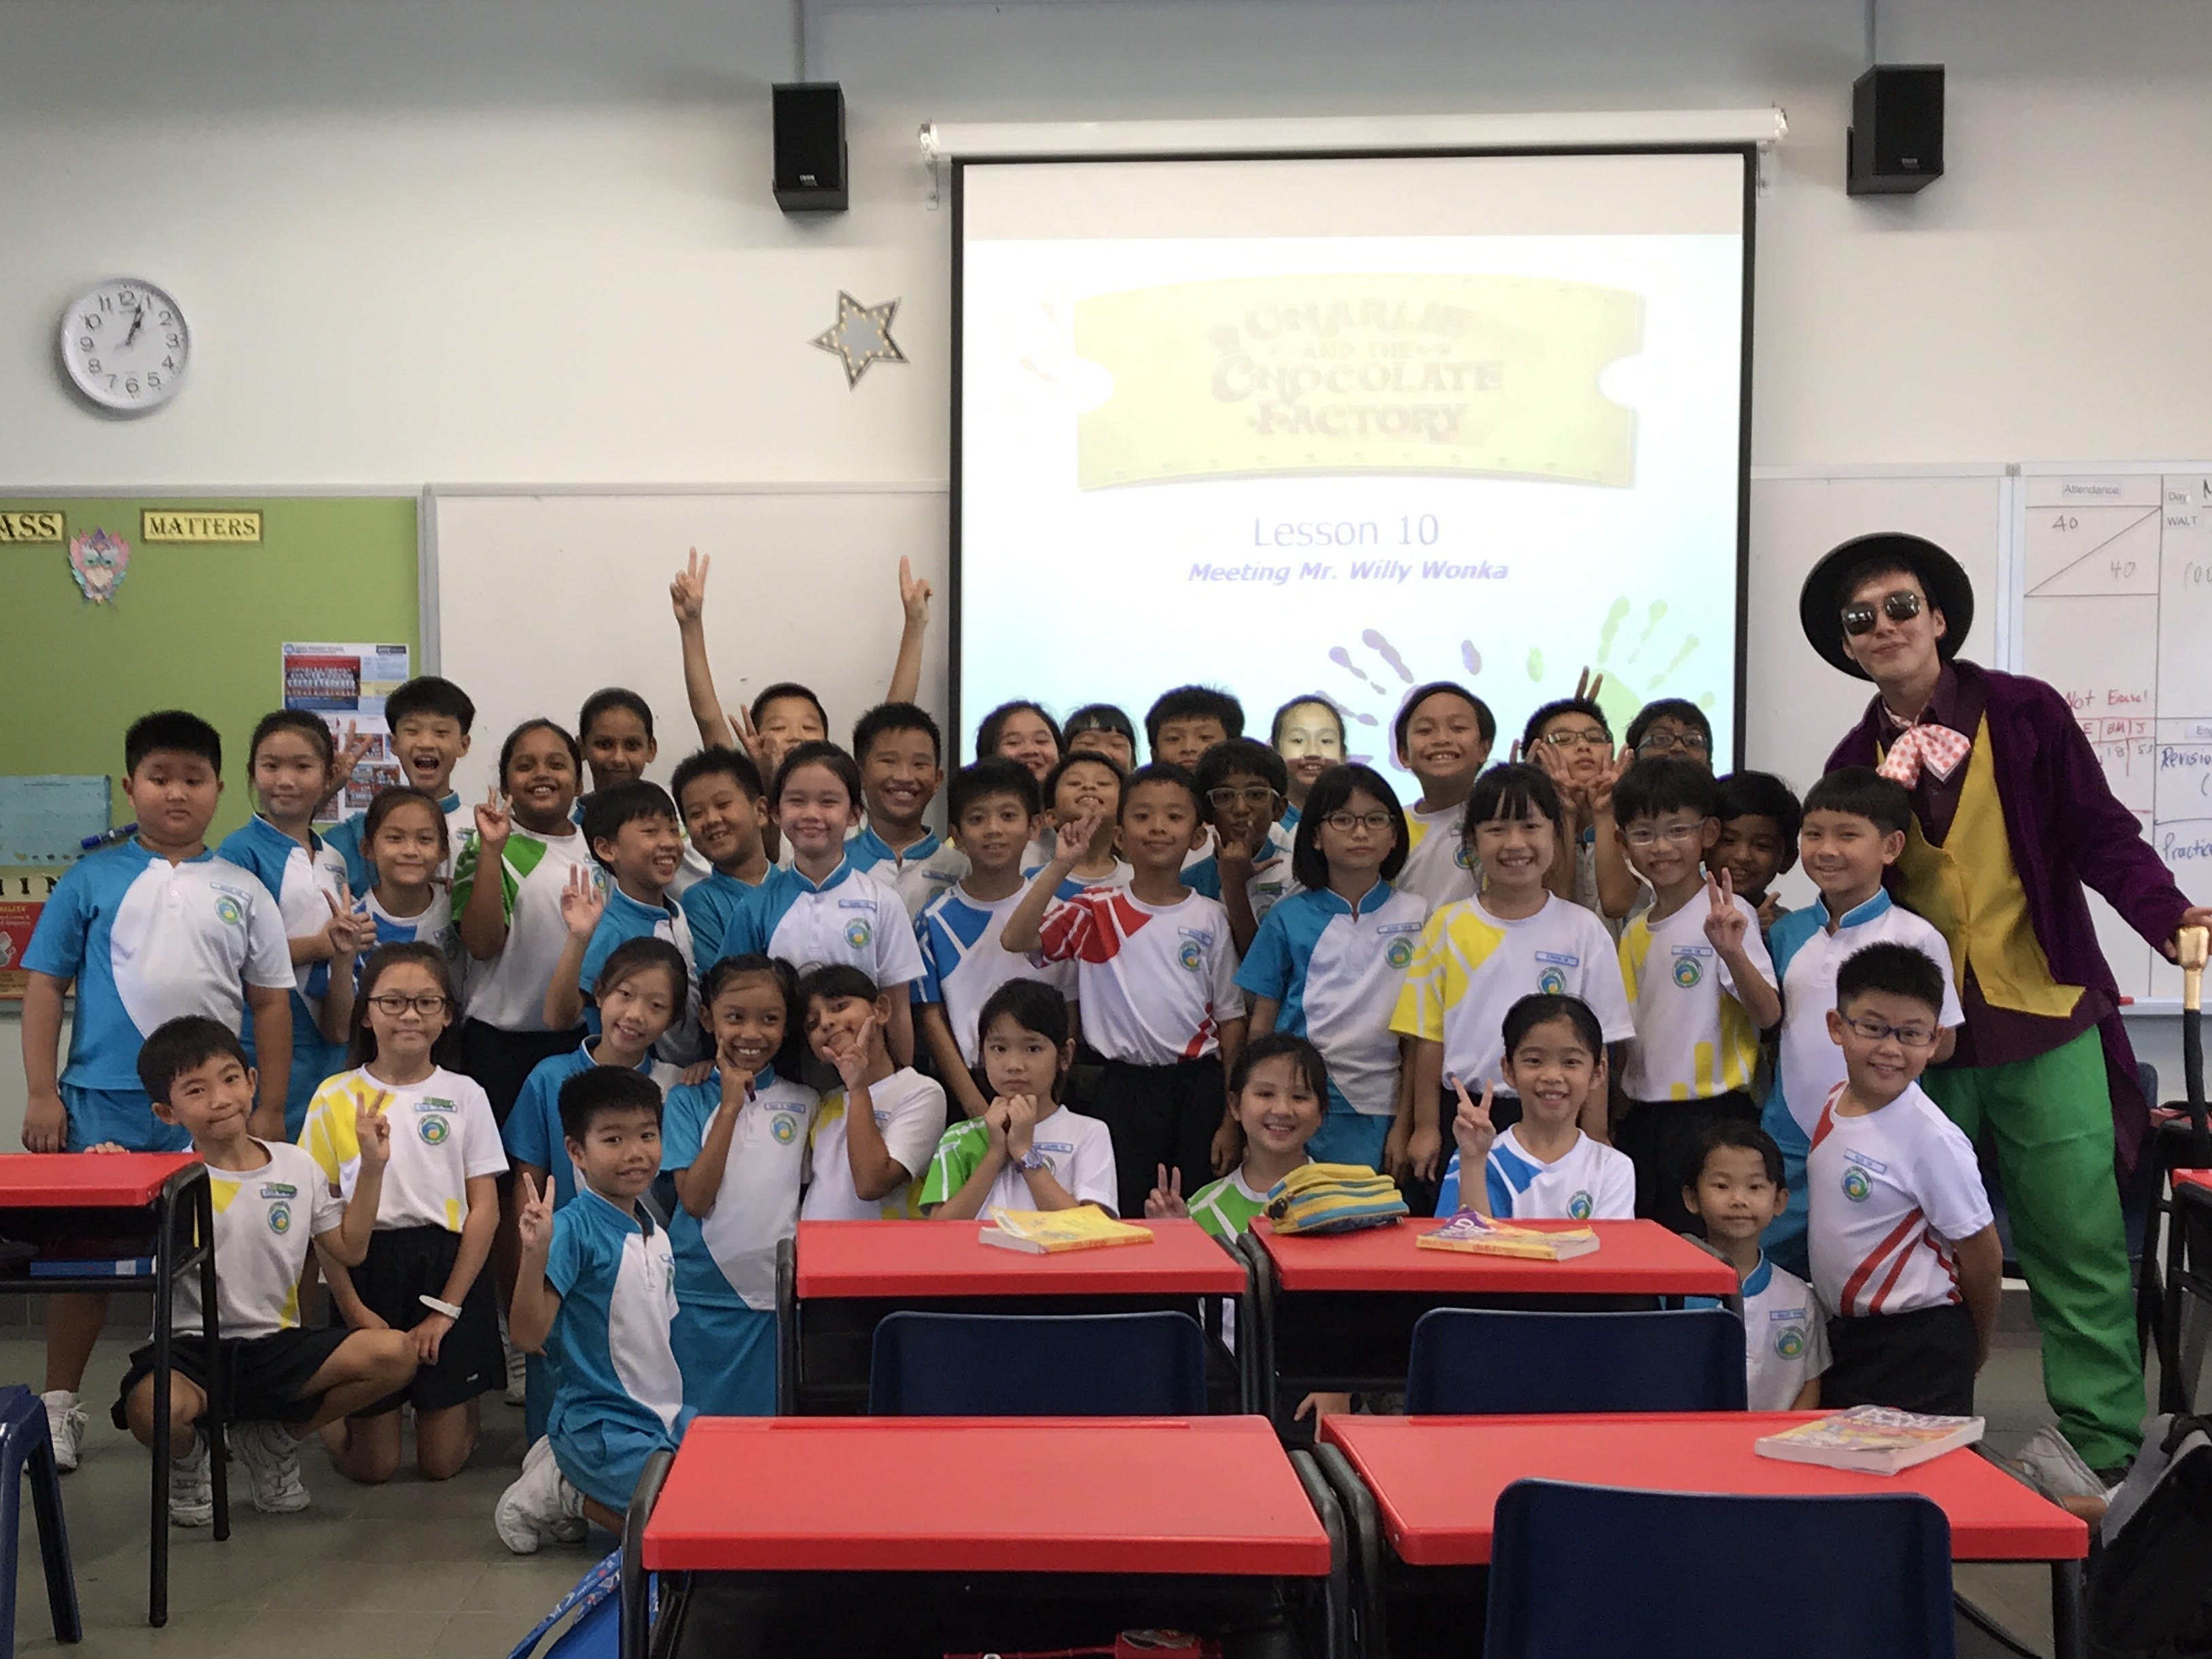 Mr Desmond Lim dresses up as Mr Willy Wonka, a character from the book Charlie and the Chocolate Factory, as part of a hot-seating activity. (Photo taken before COVID-19.)